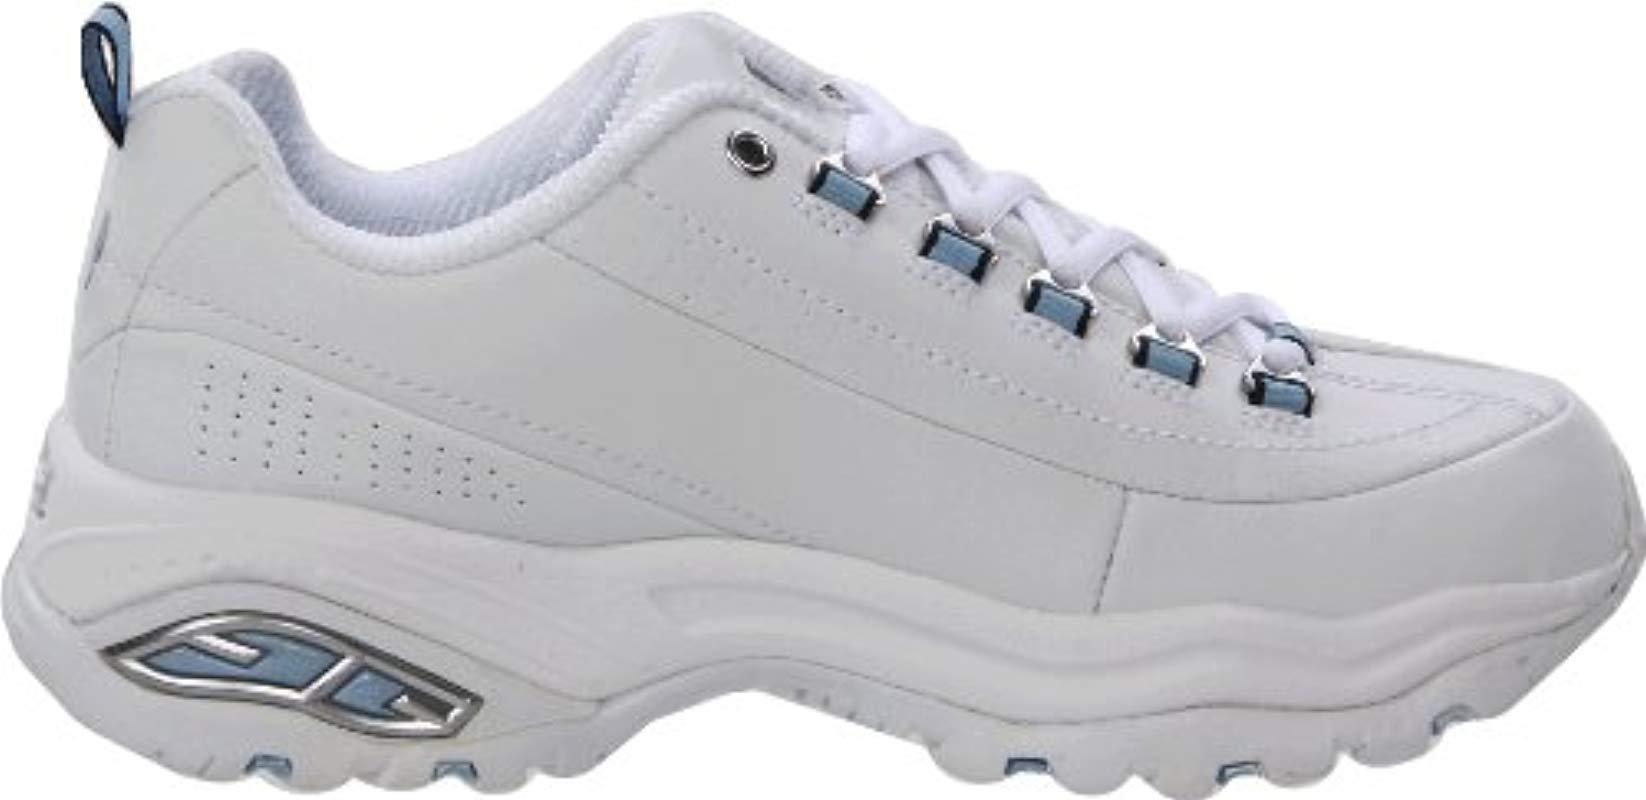 Skechers Premiums White Smooth Leather/blue Trim 8.5 - Save 51% - Lyst